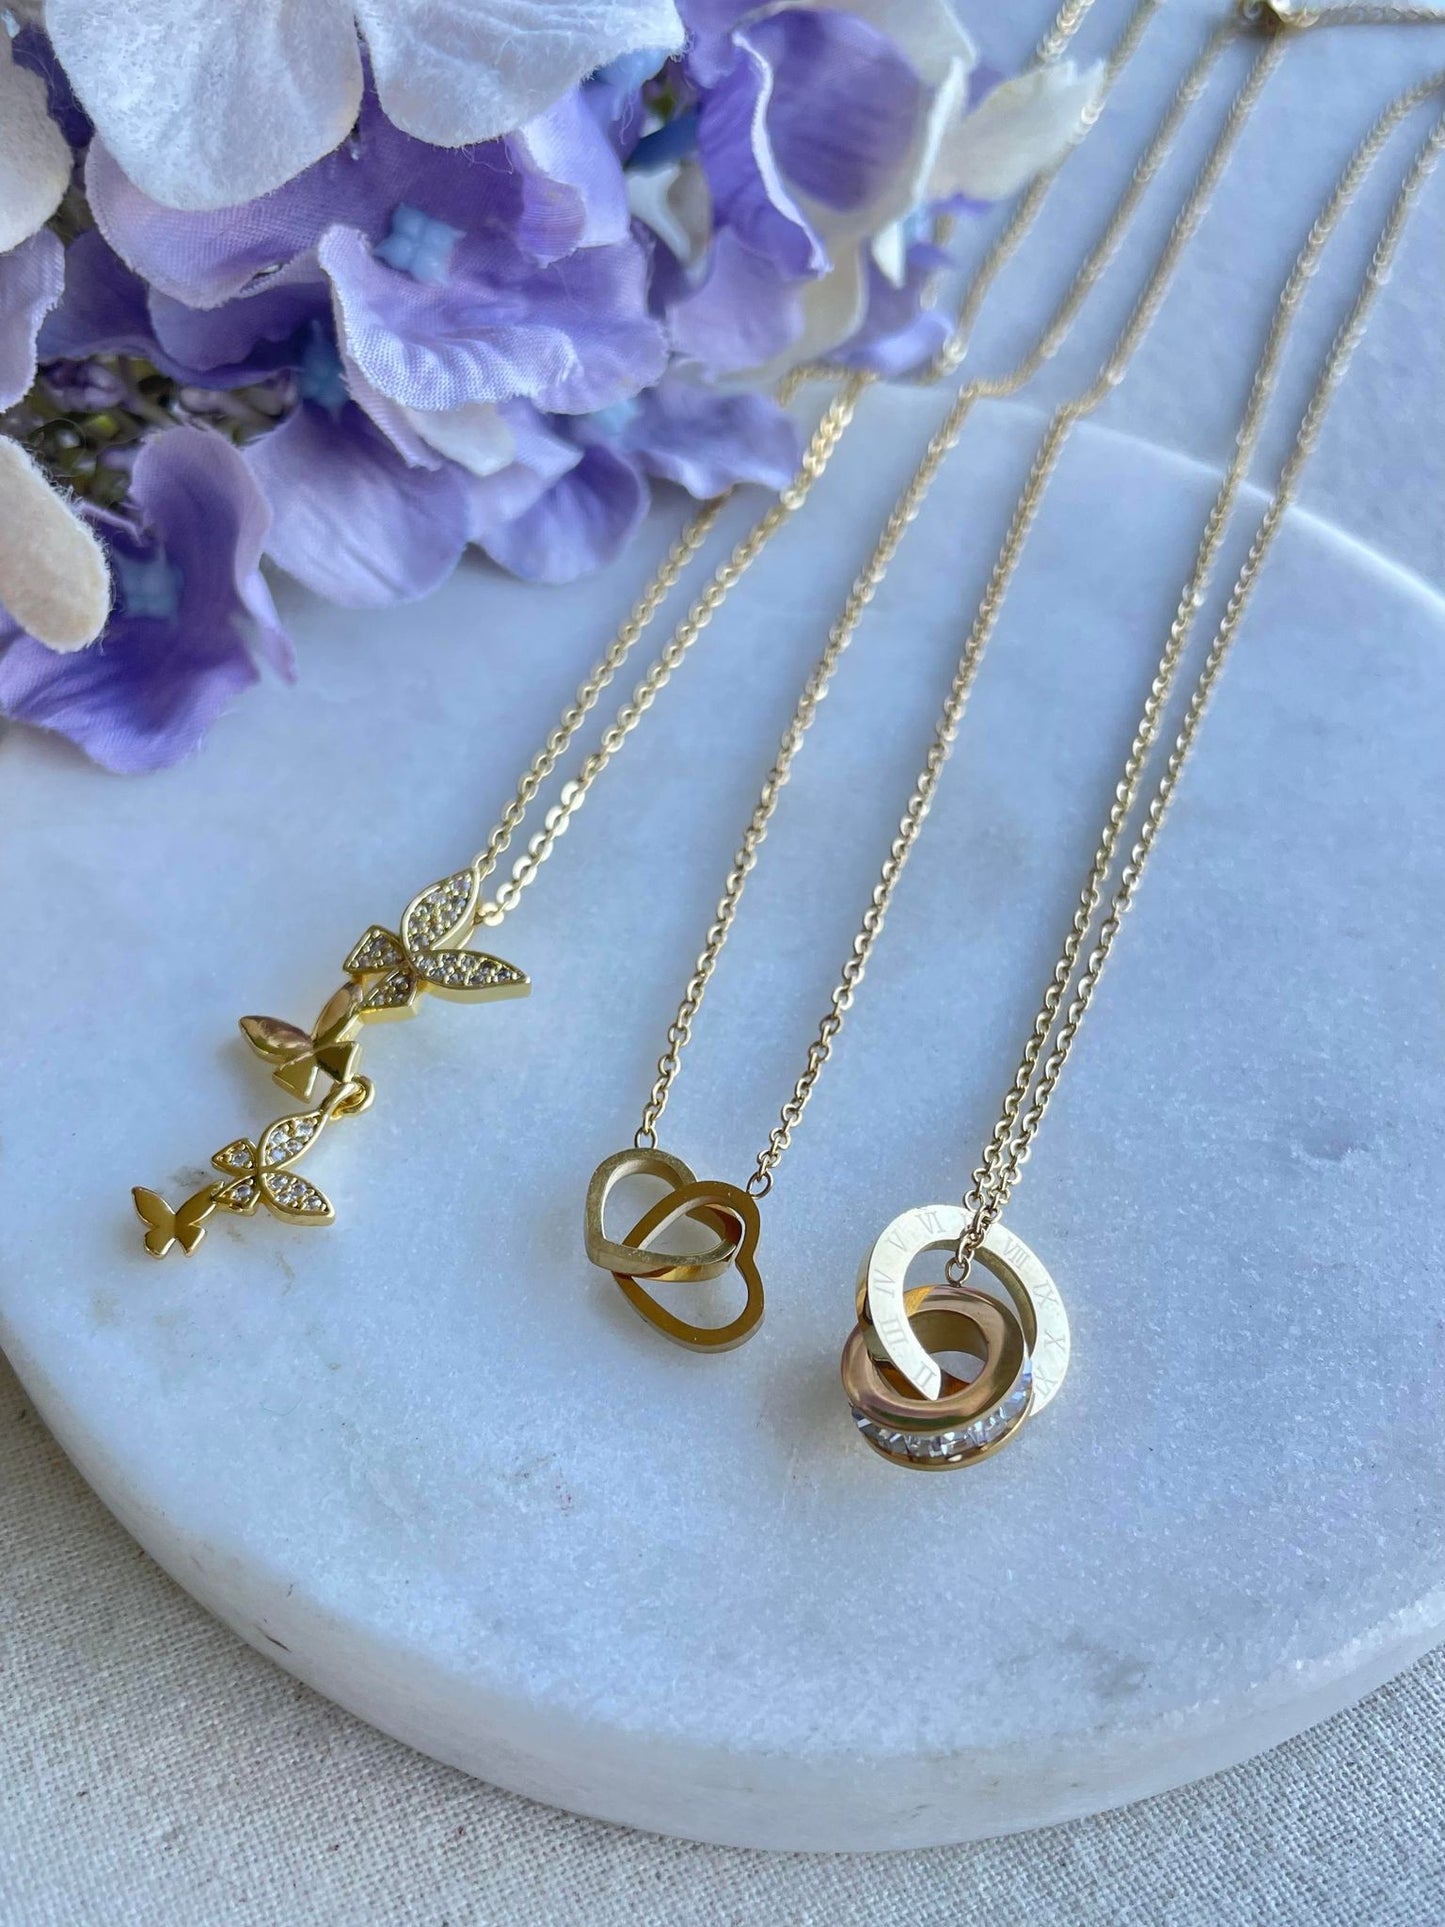 Rings on time gold necklace - Gold Plated Tarnish Free Jewellery